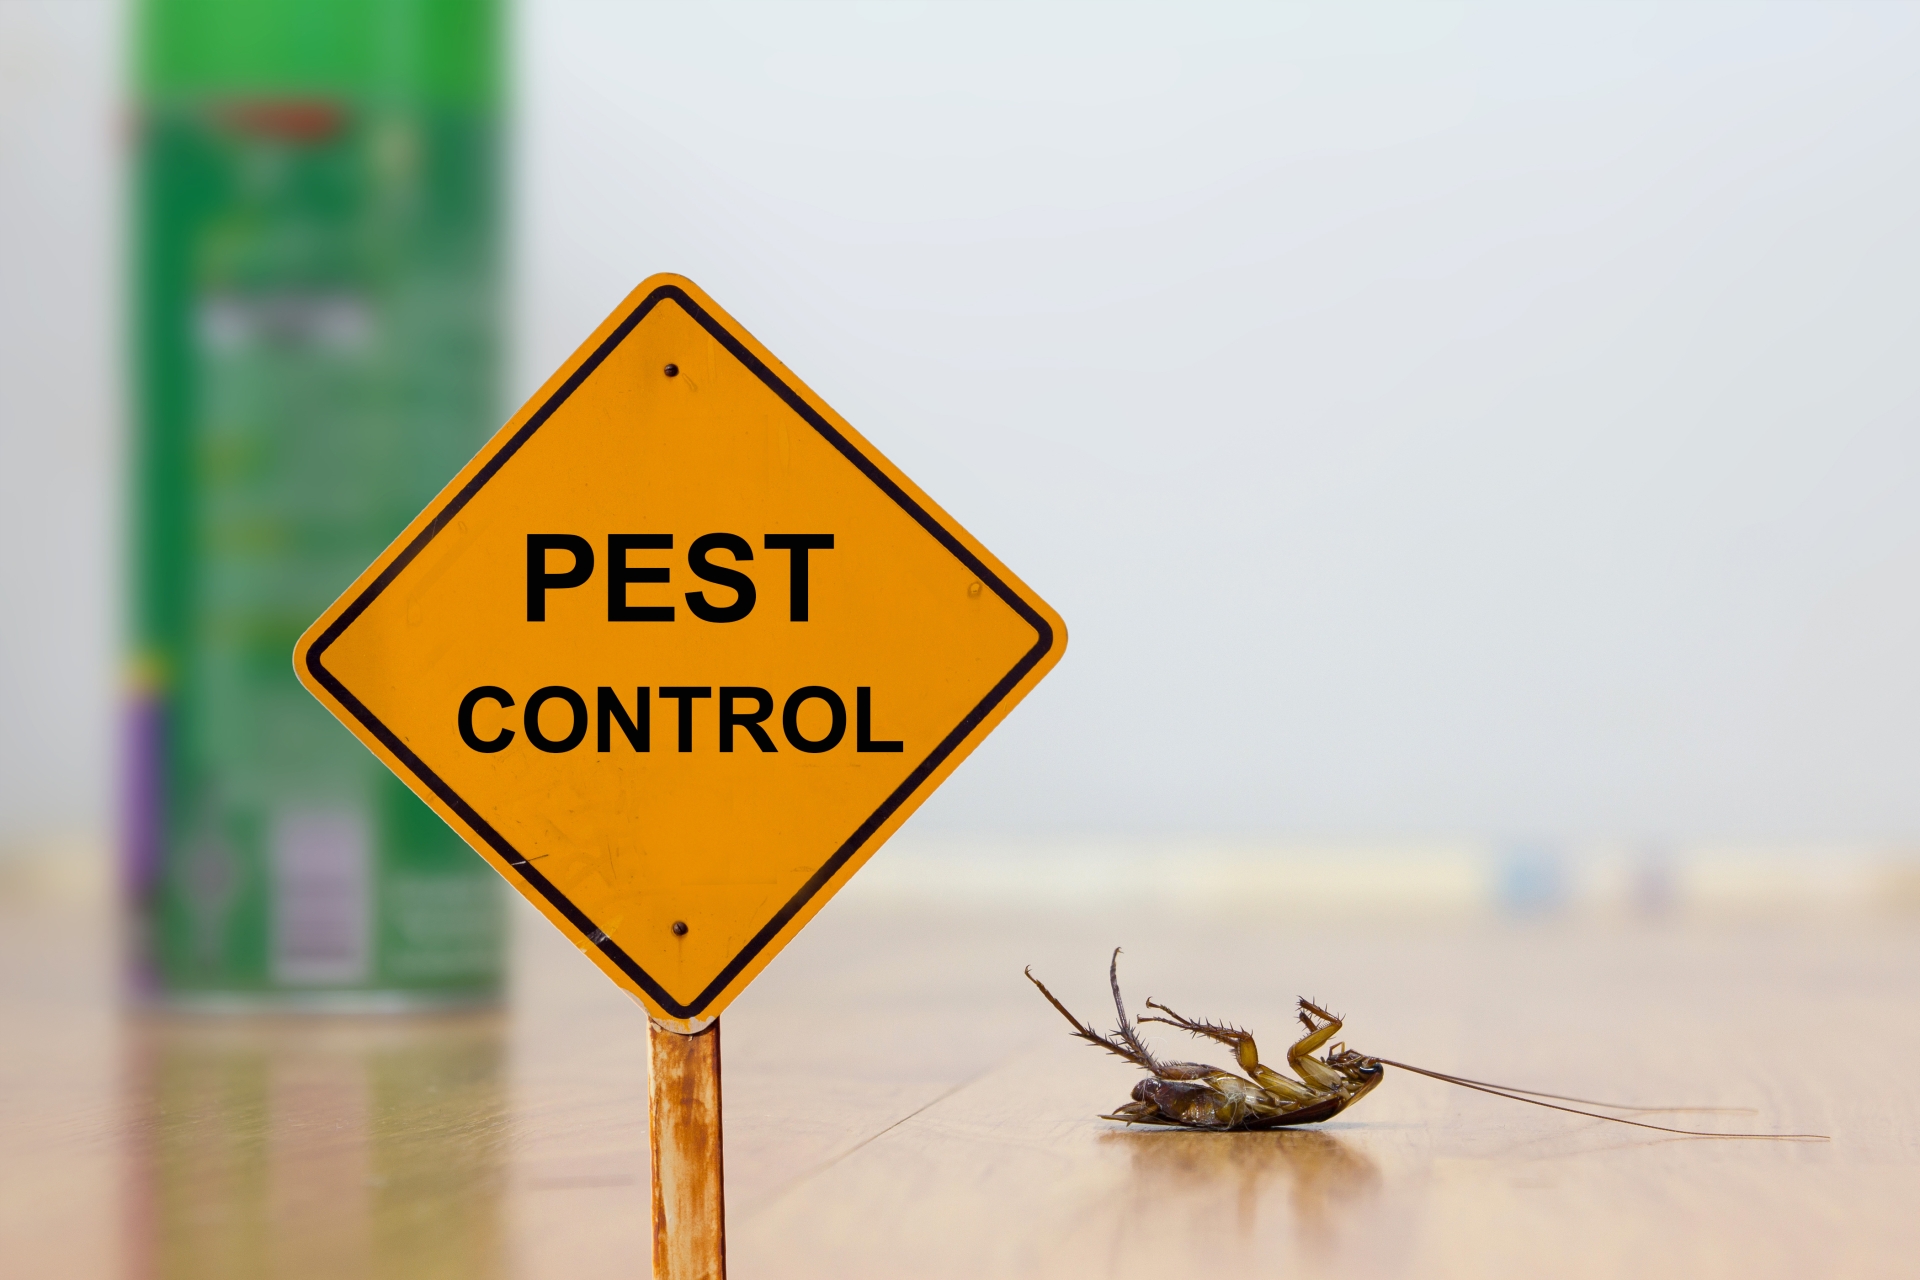 24 Hour Pest Control, Pest Control in Southgate, N14. Call Now 020 8166 9746